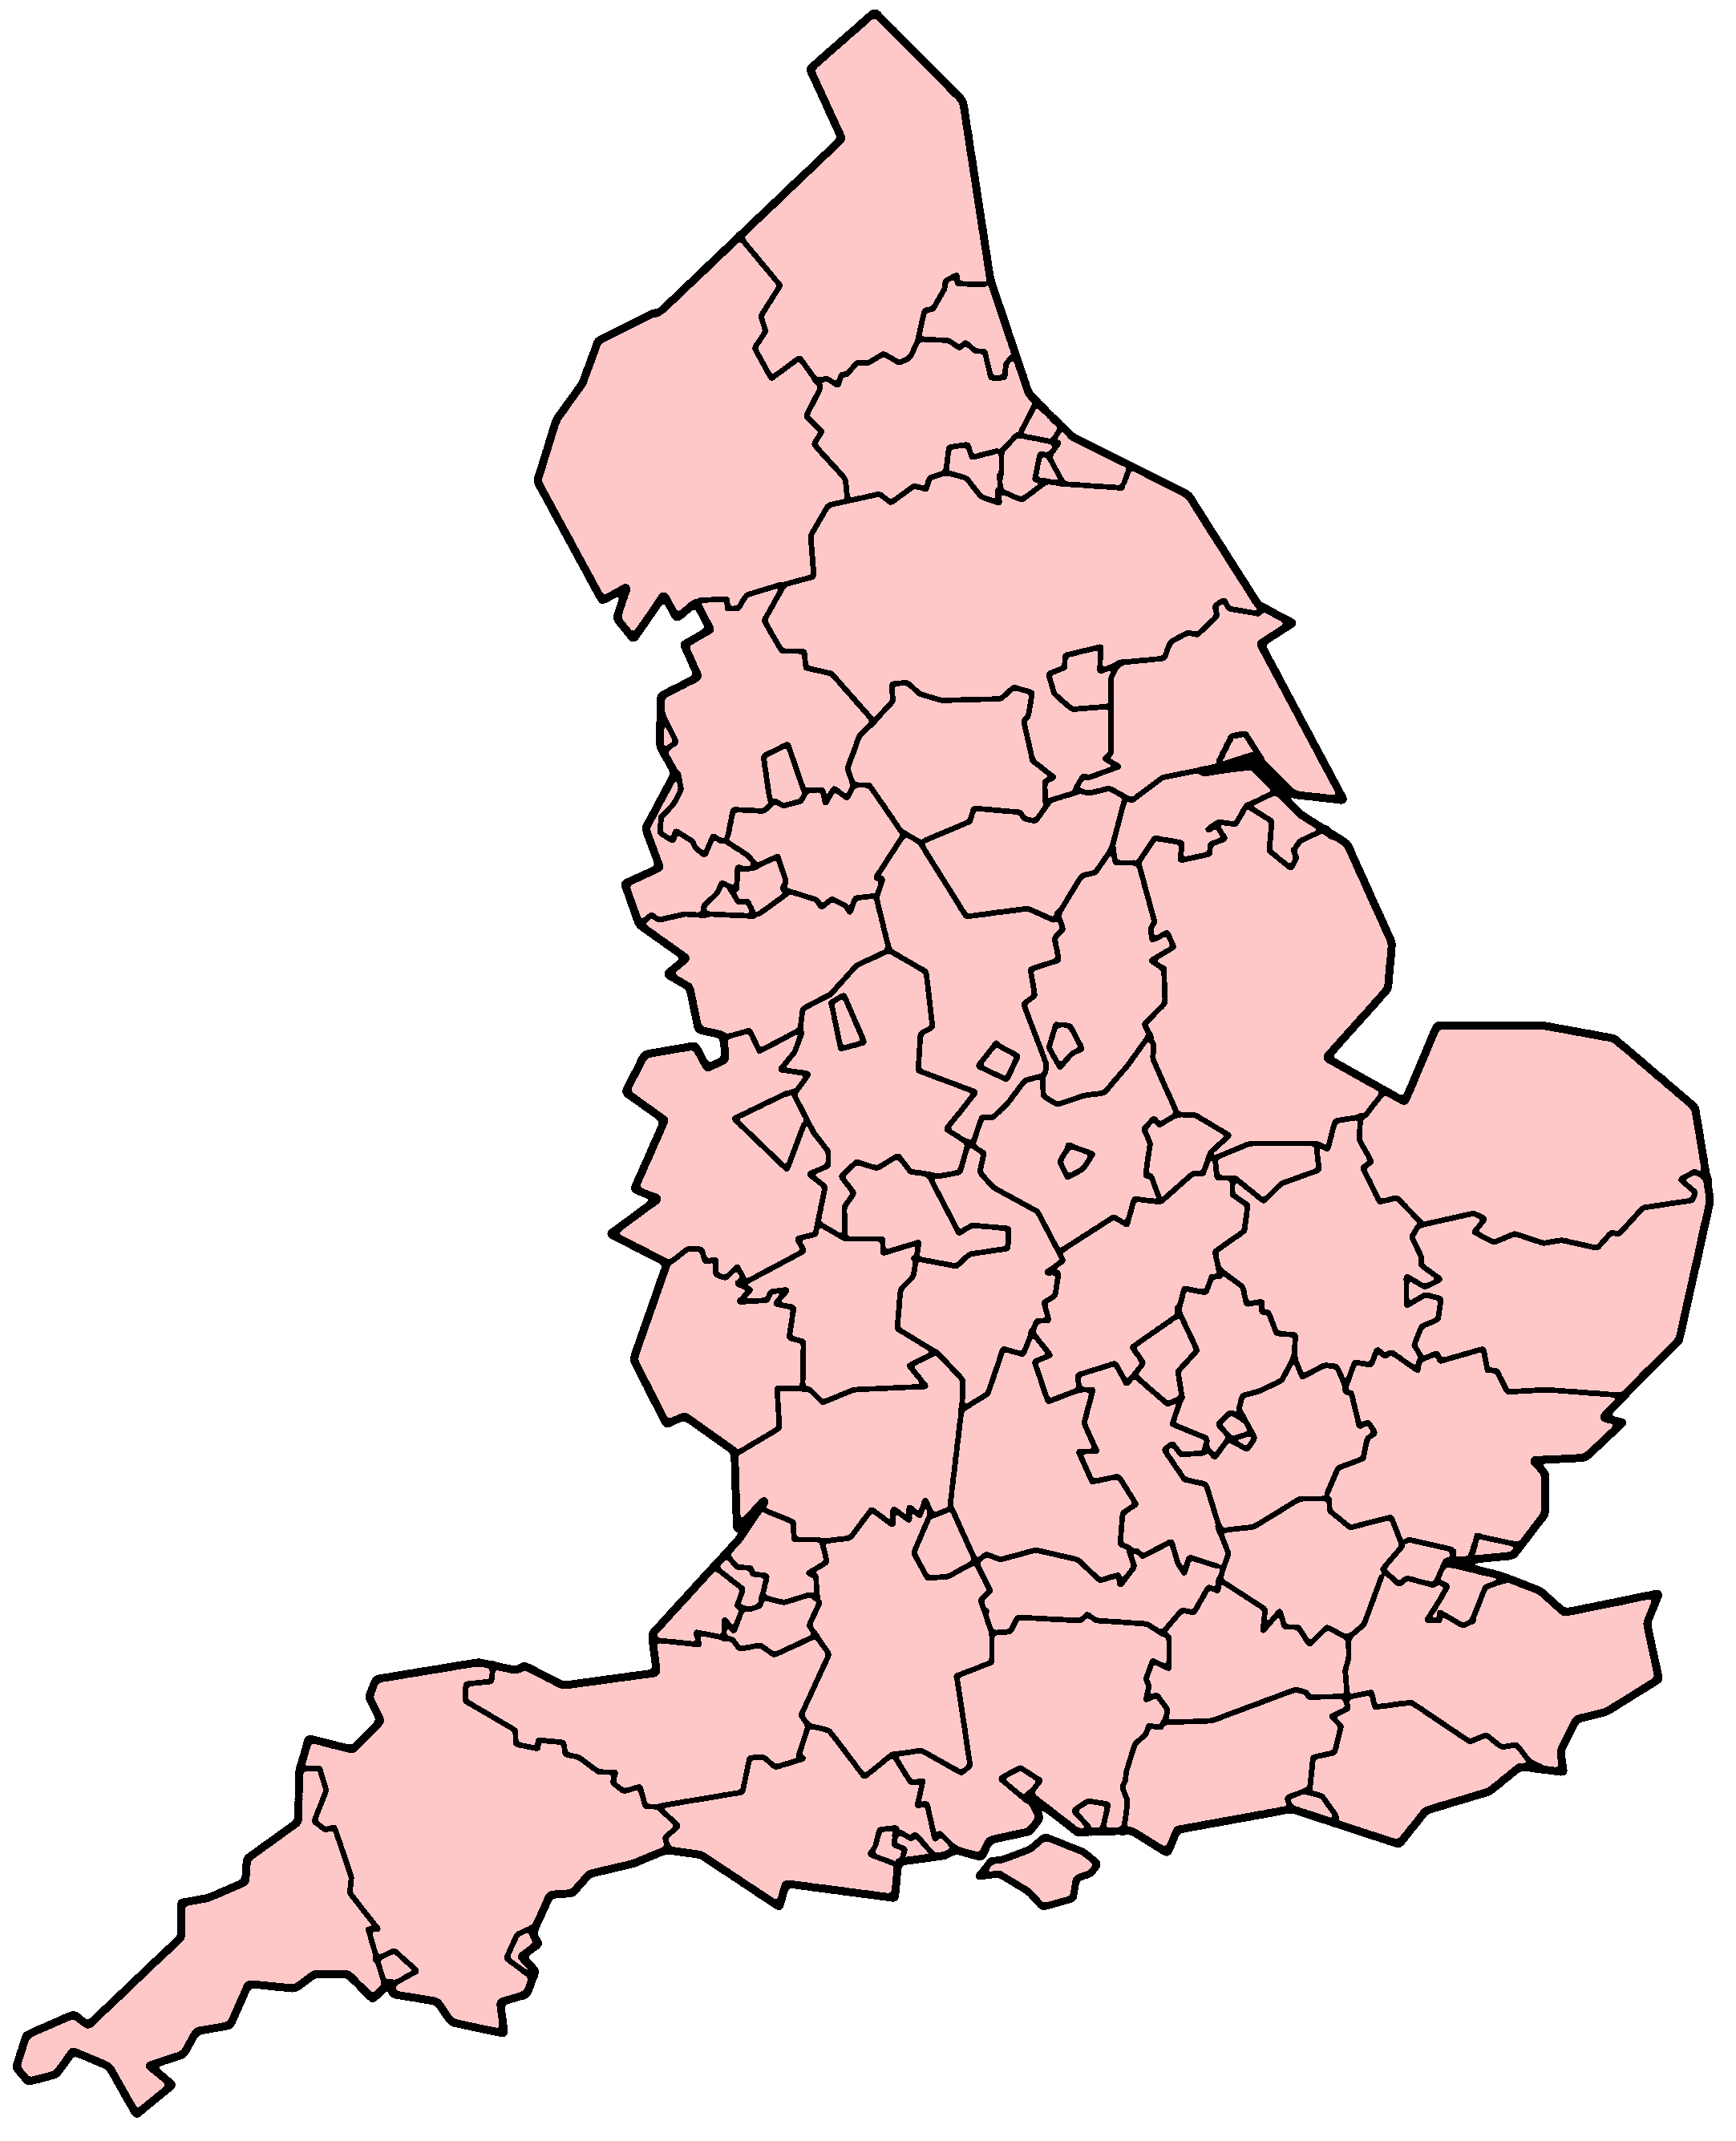 File:BlankMap-EnglandAdministrativeCounties.png